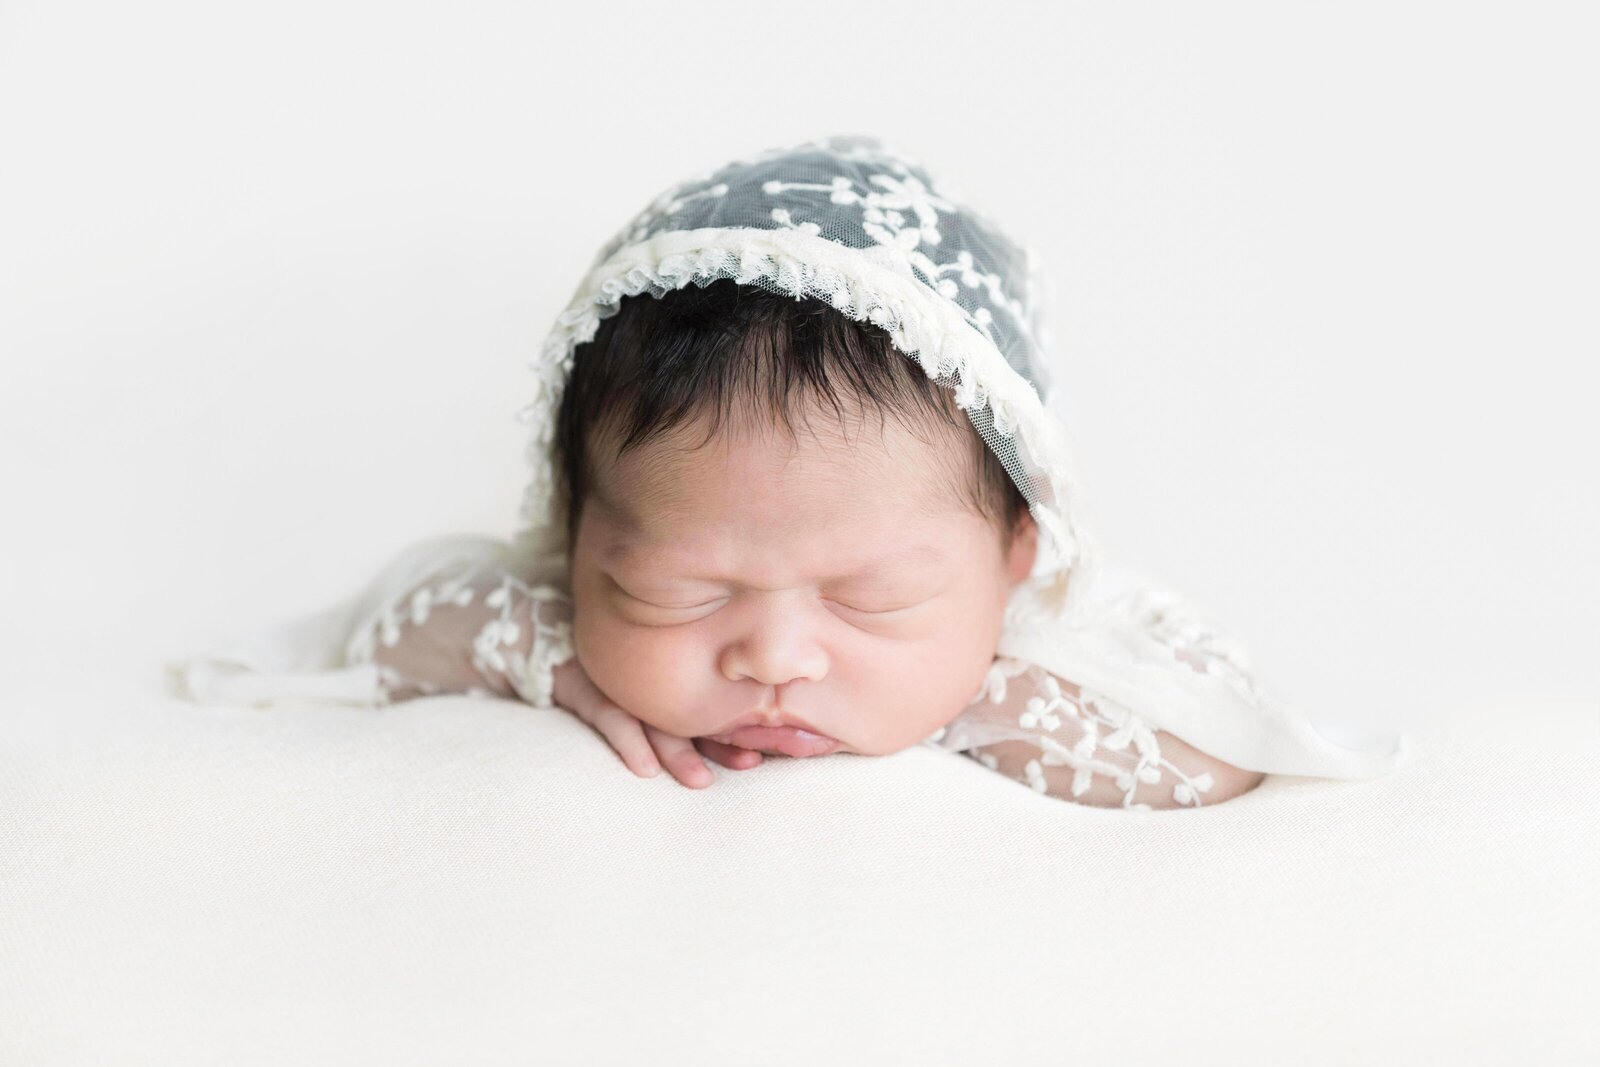 Sleeping baby with lace outfit by Northern Virginia Newborn Photographer Stephanie Honikel